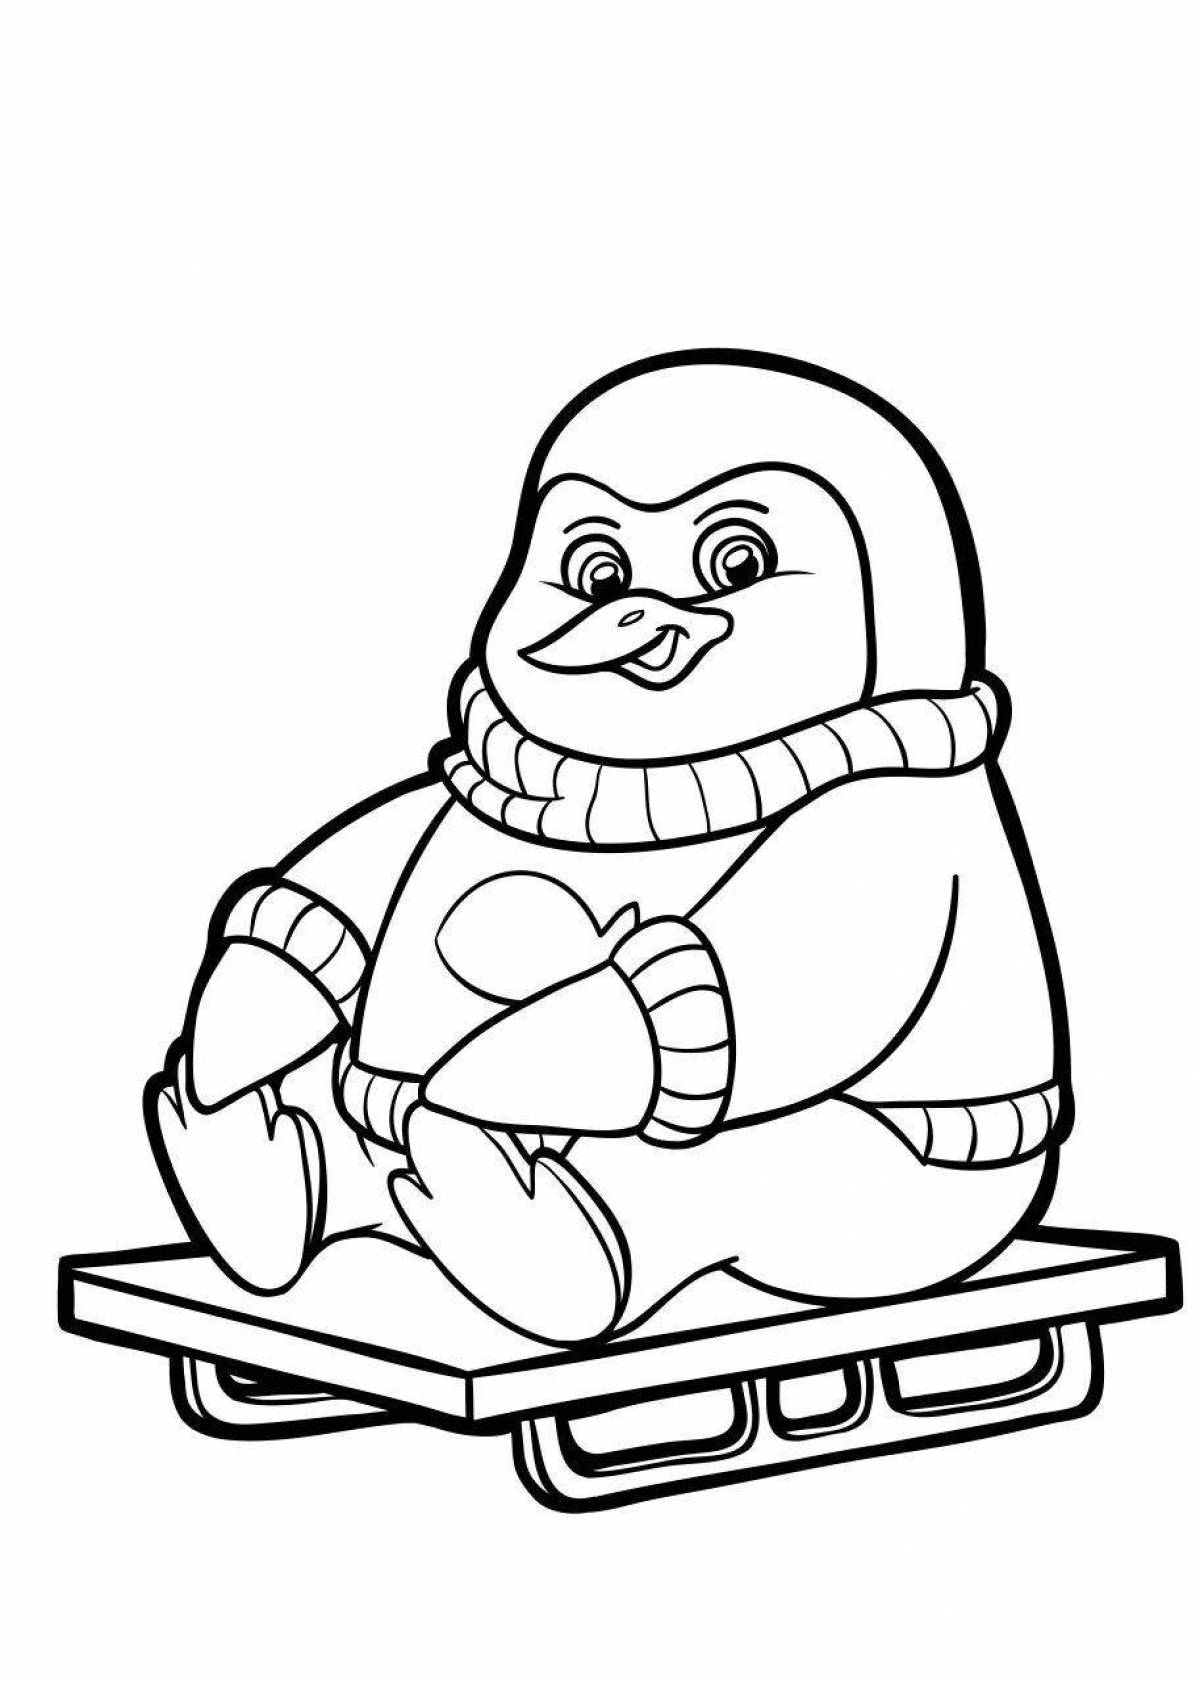 Happy penguin family coloring page